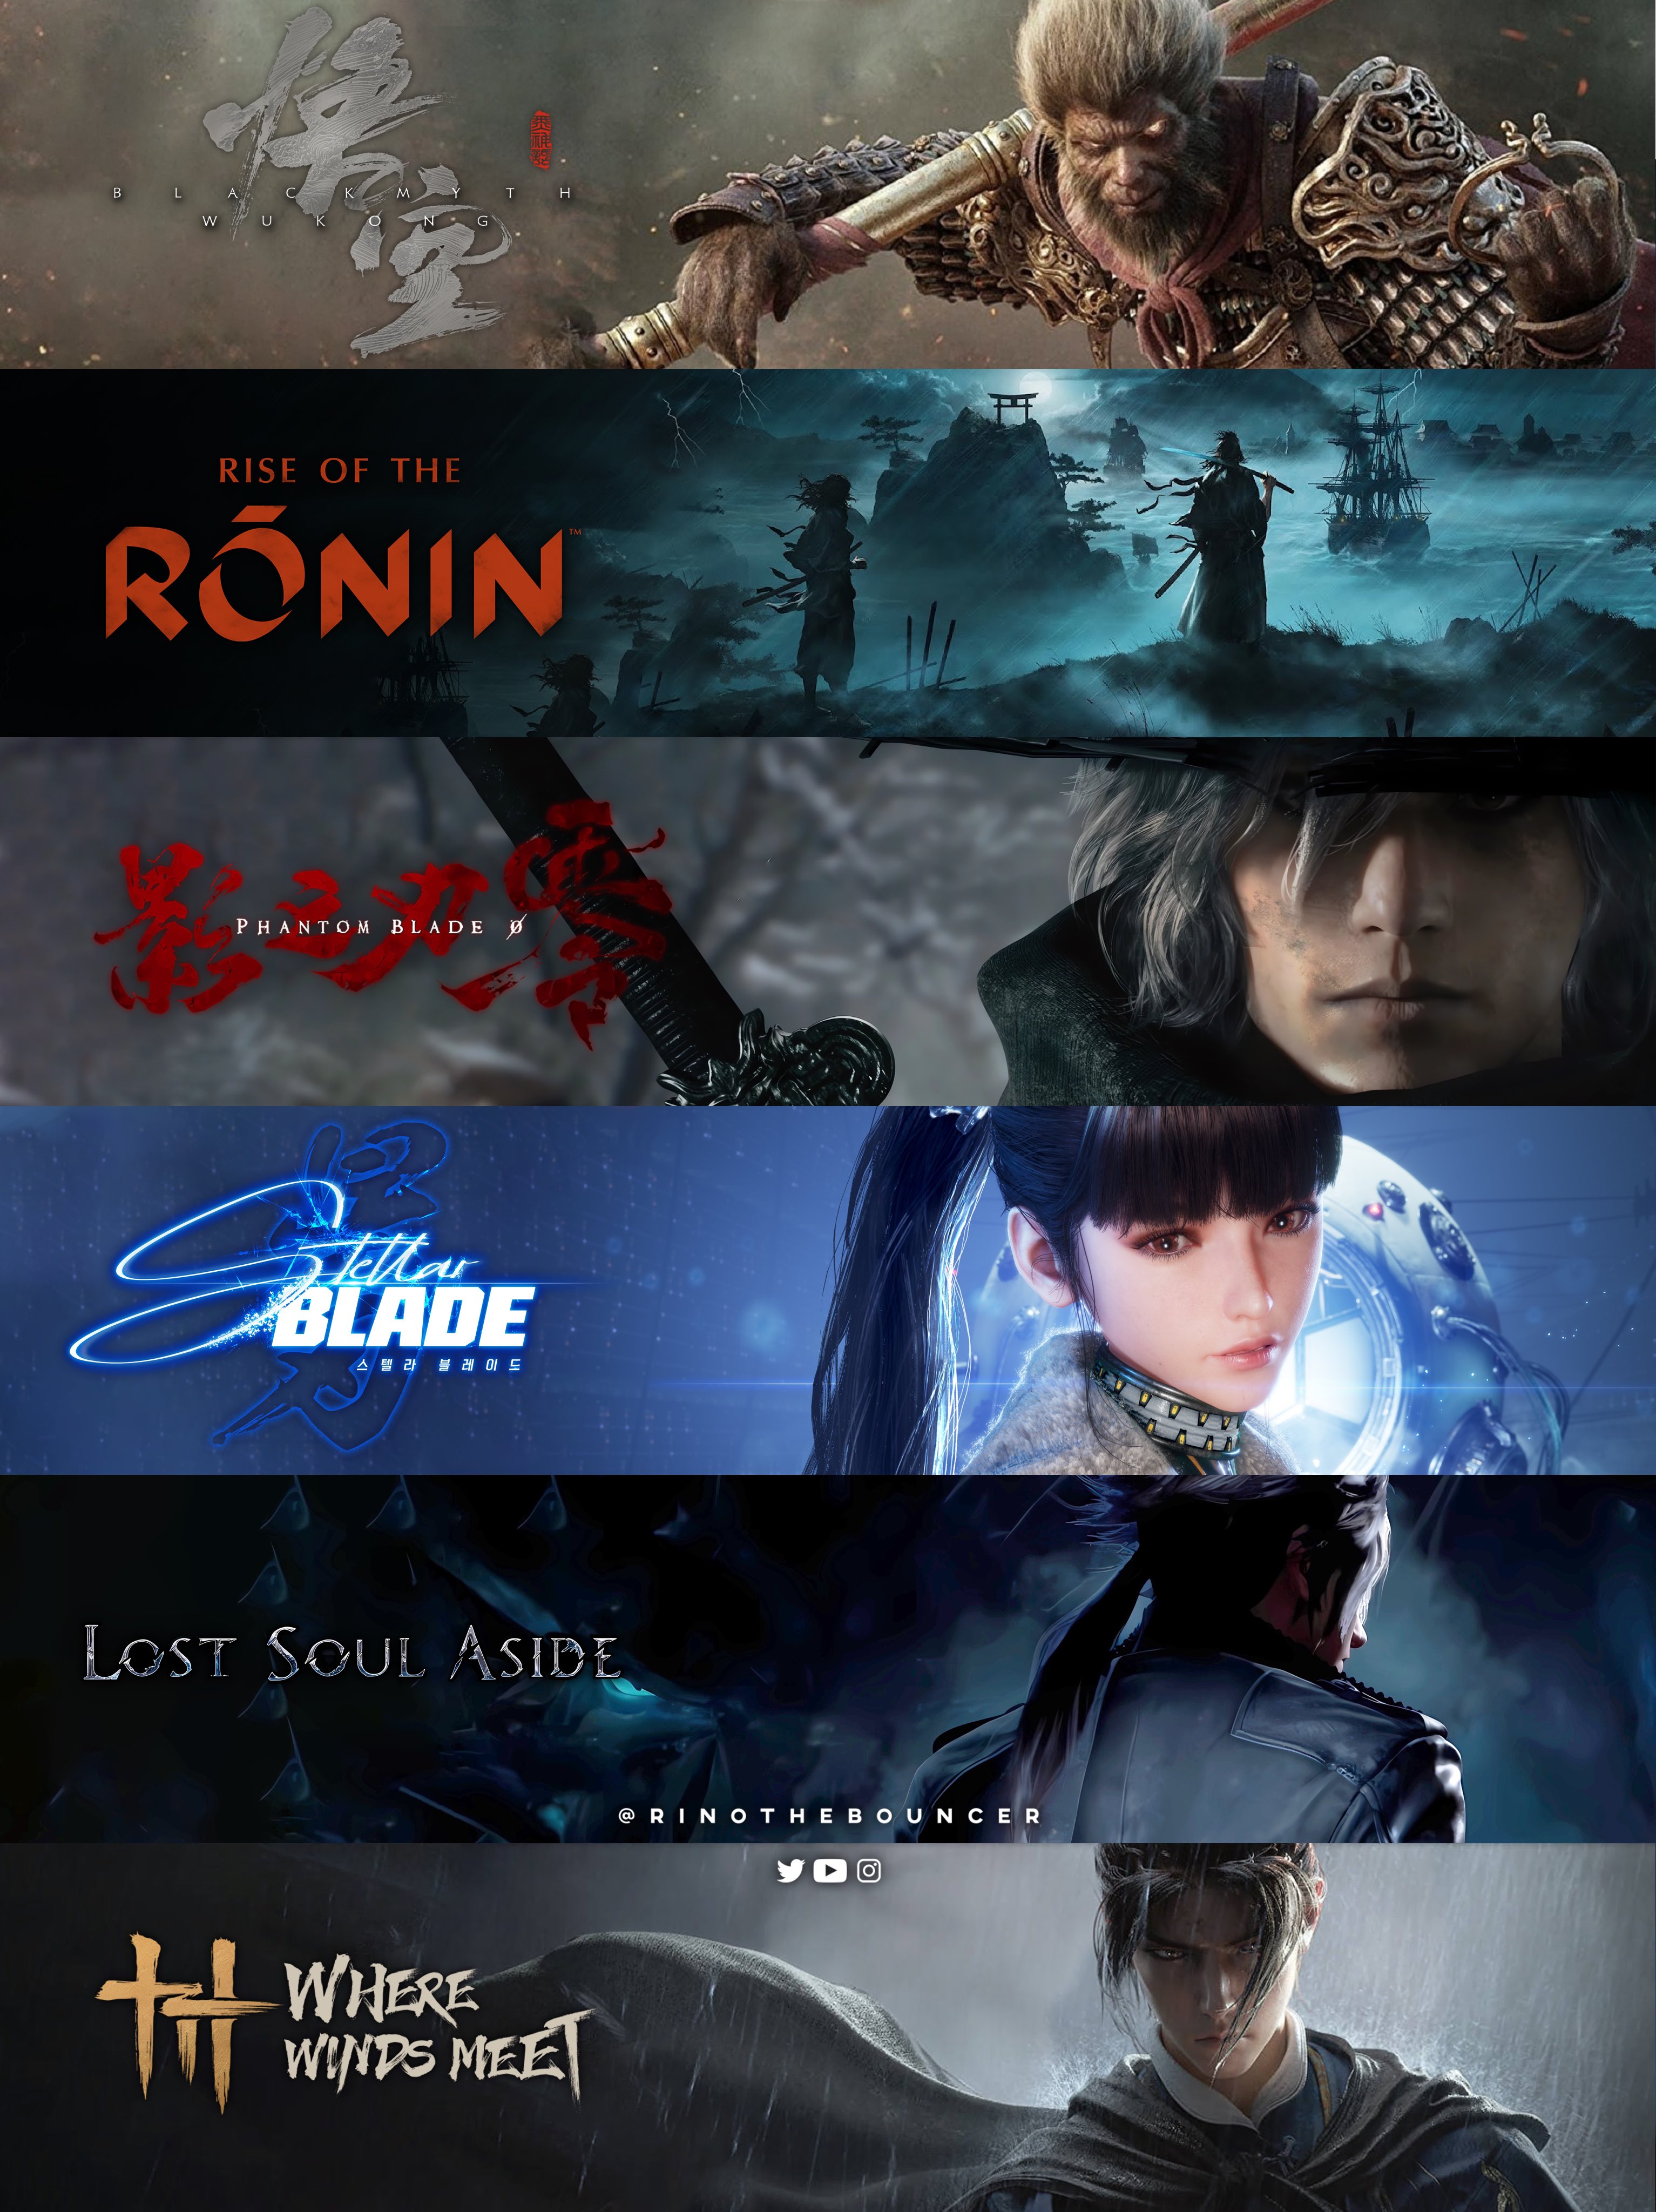 Rino on X: Promising games from Asian studios 🚀 ✓Black Myth Wukong:  Summer 2024 ✓Rise of the Ronin: 2024 ✓Phantom Blade 0: TBC ✓Stellar Blade:  2023 ✓Lost Soul Aside: Q2 2024 ✓Where